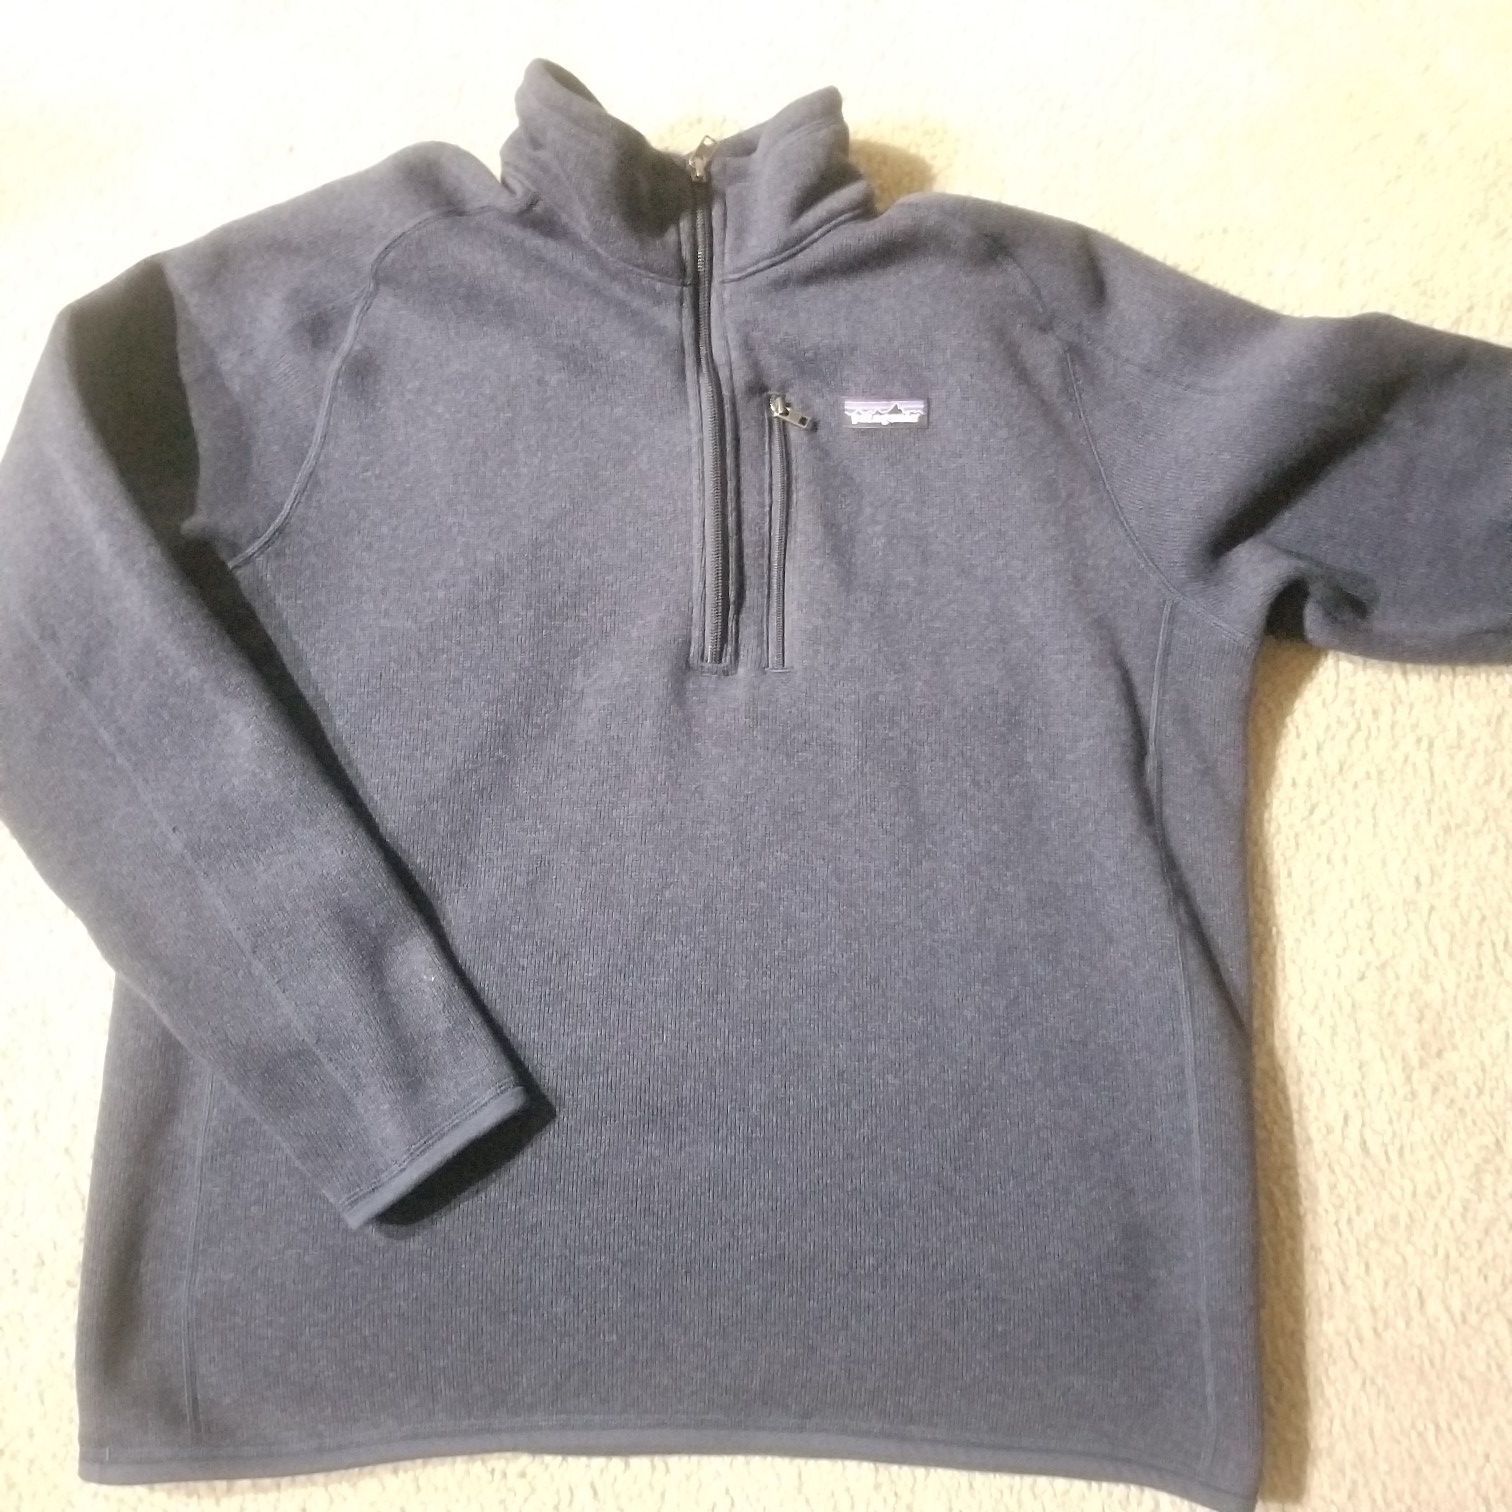 New Patagonia Better Sweater pullover sz L Navy